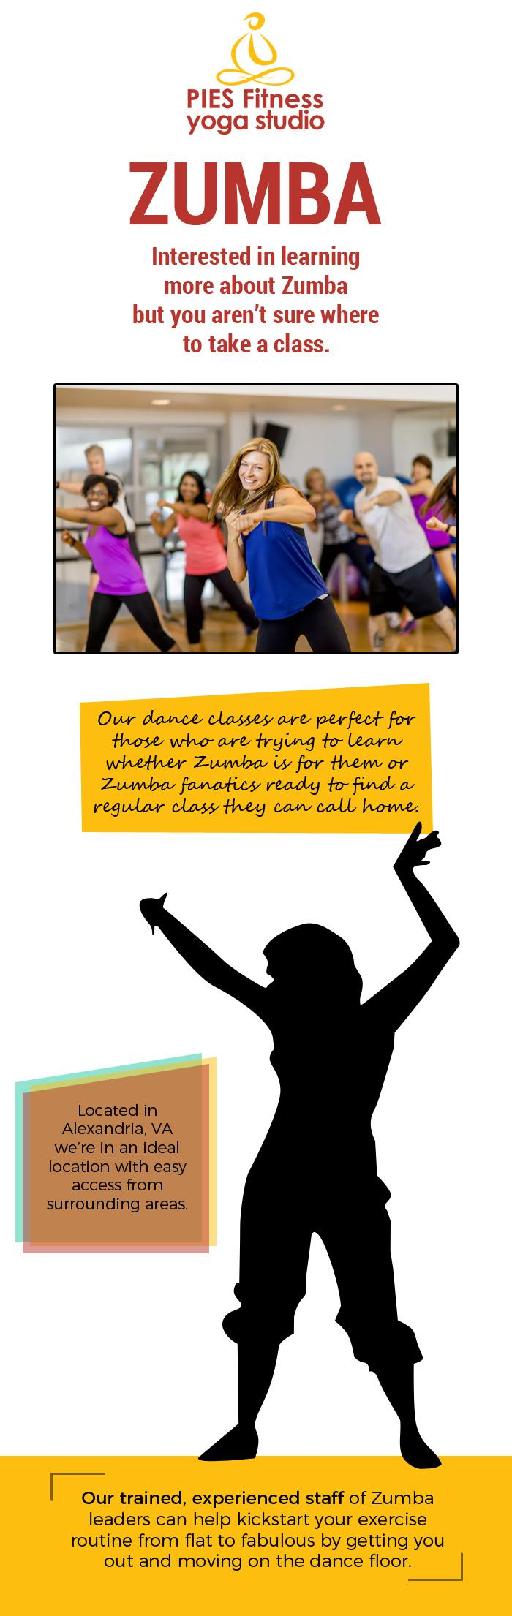 Get in touch with PIES Fitness Yoga Studio to Learn Zumba